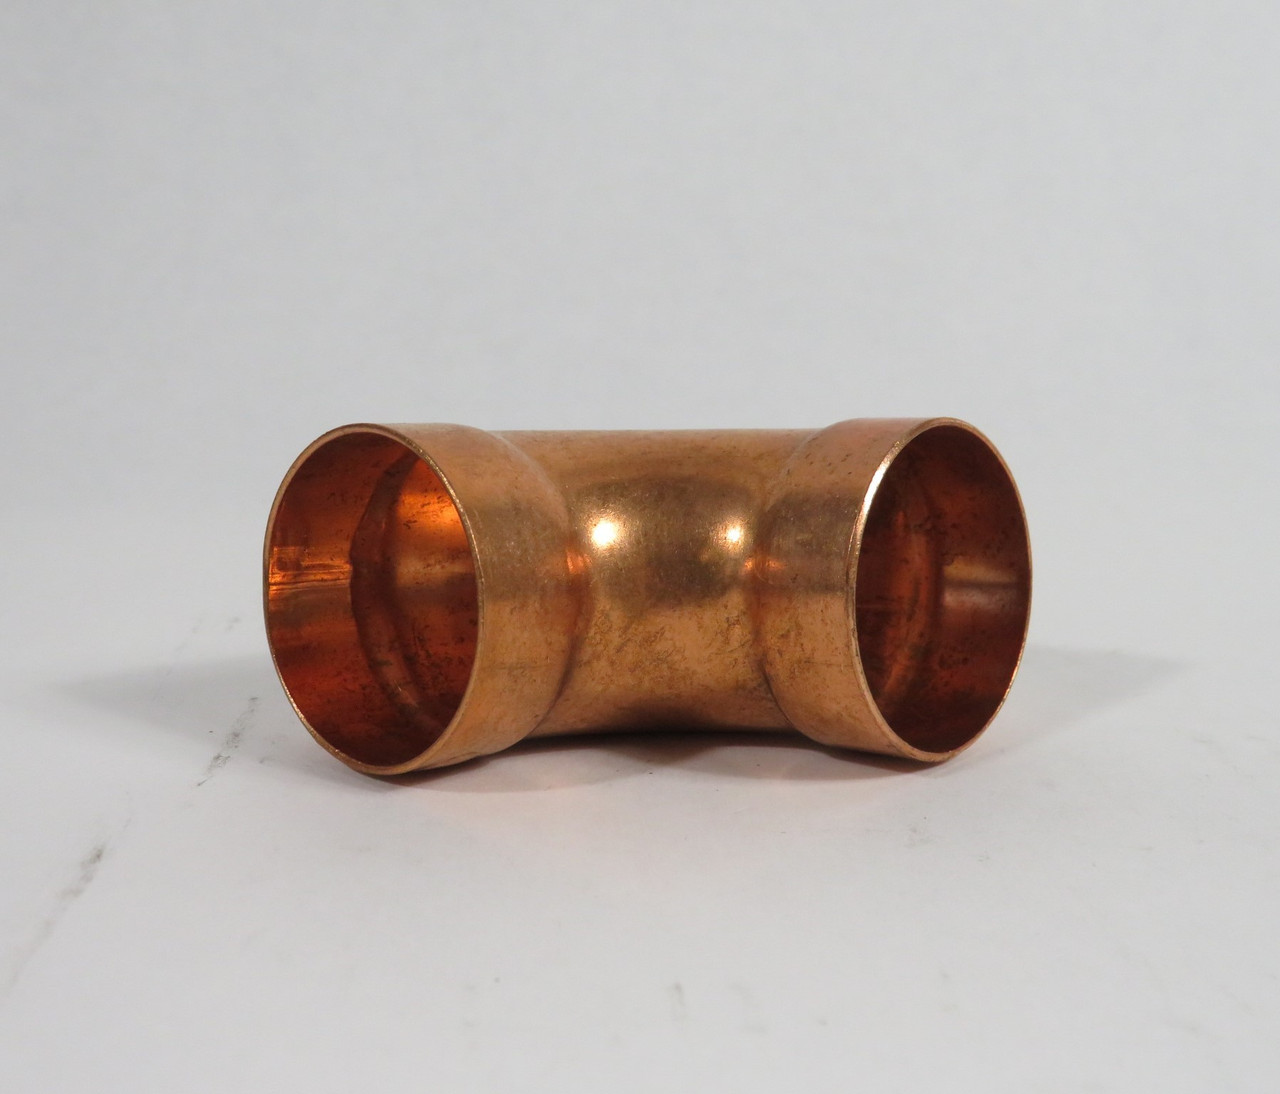 Cello WP6-16 Copper 1" Female Solder 45 Degree Elbow Fitting USED